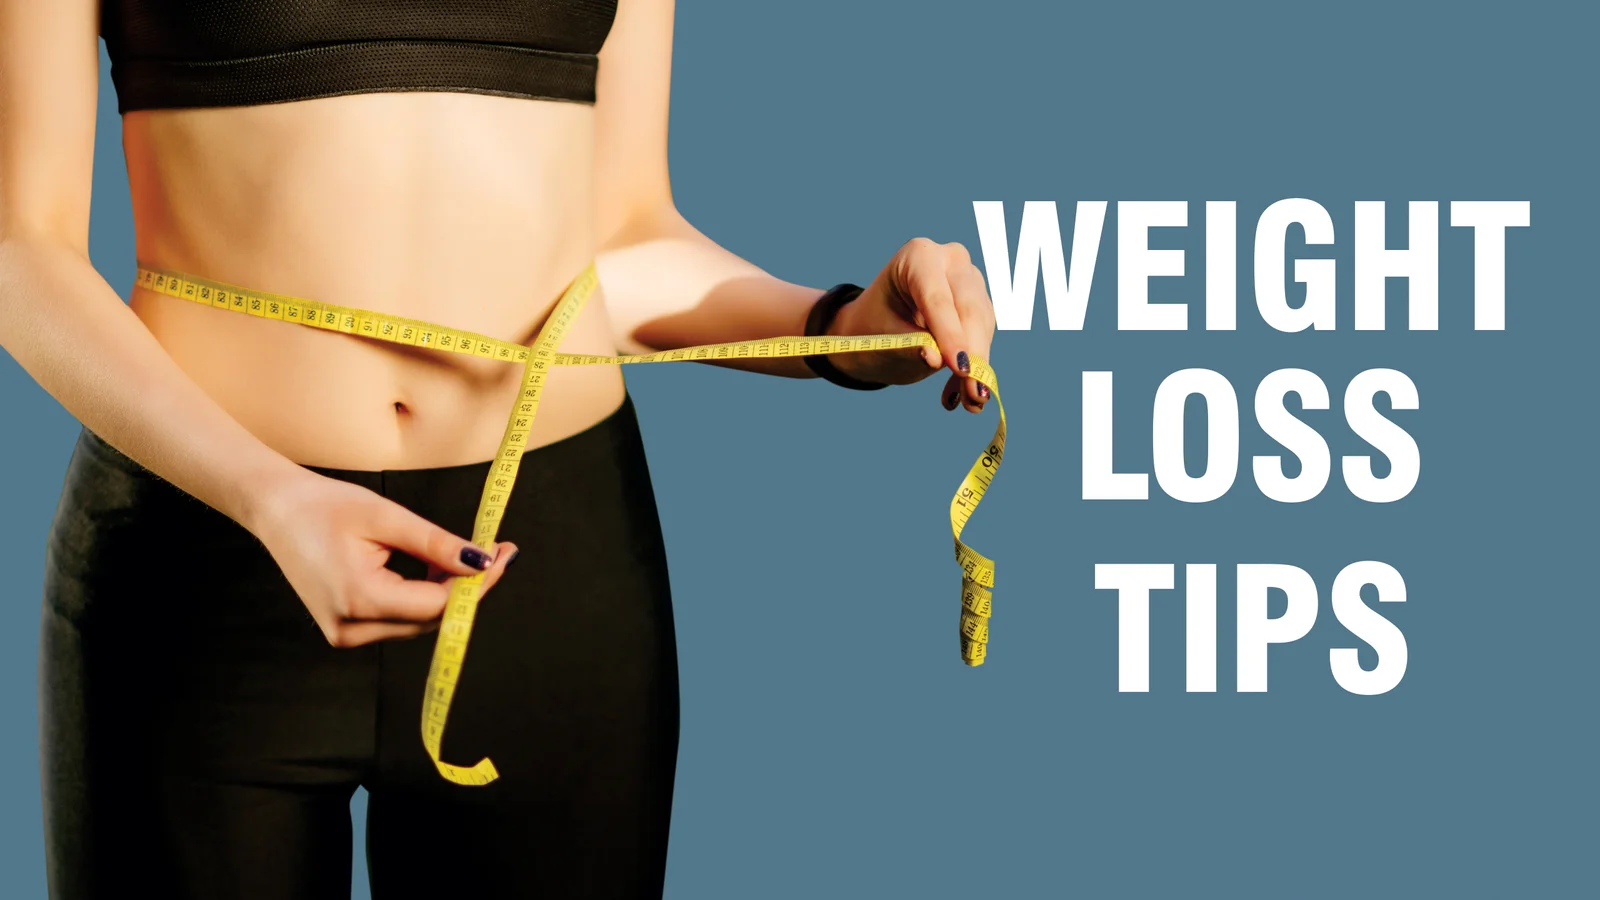 6 Exciting Weight Loss Tips That Are Unique And Fun To Apply